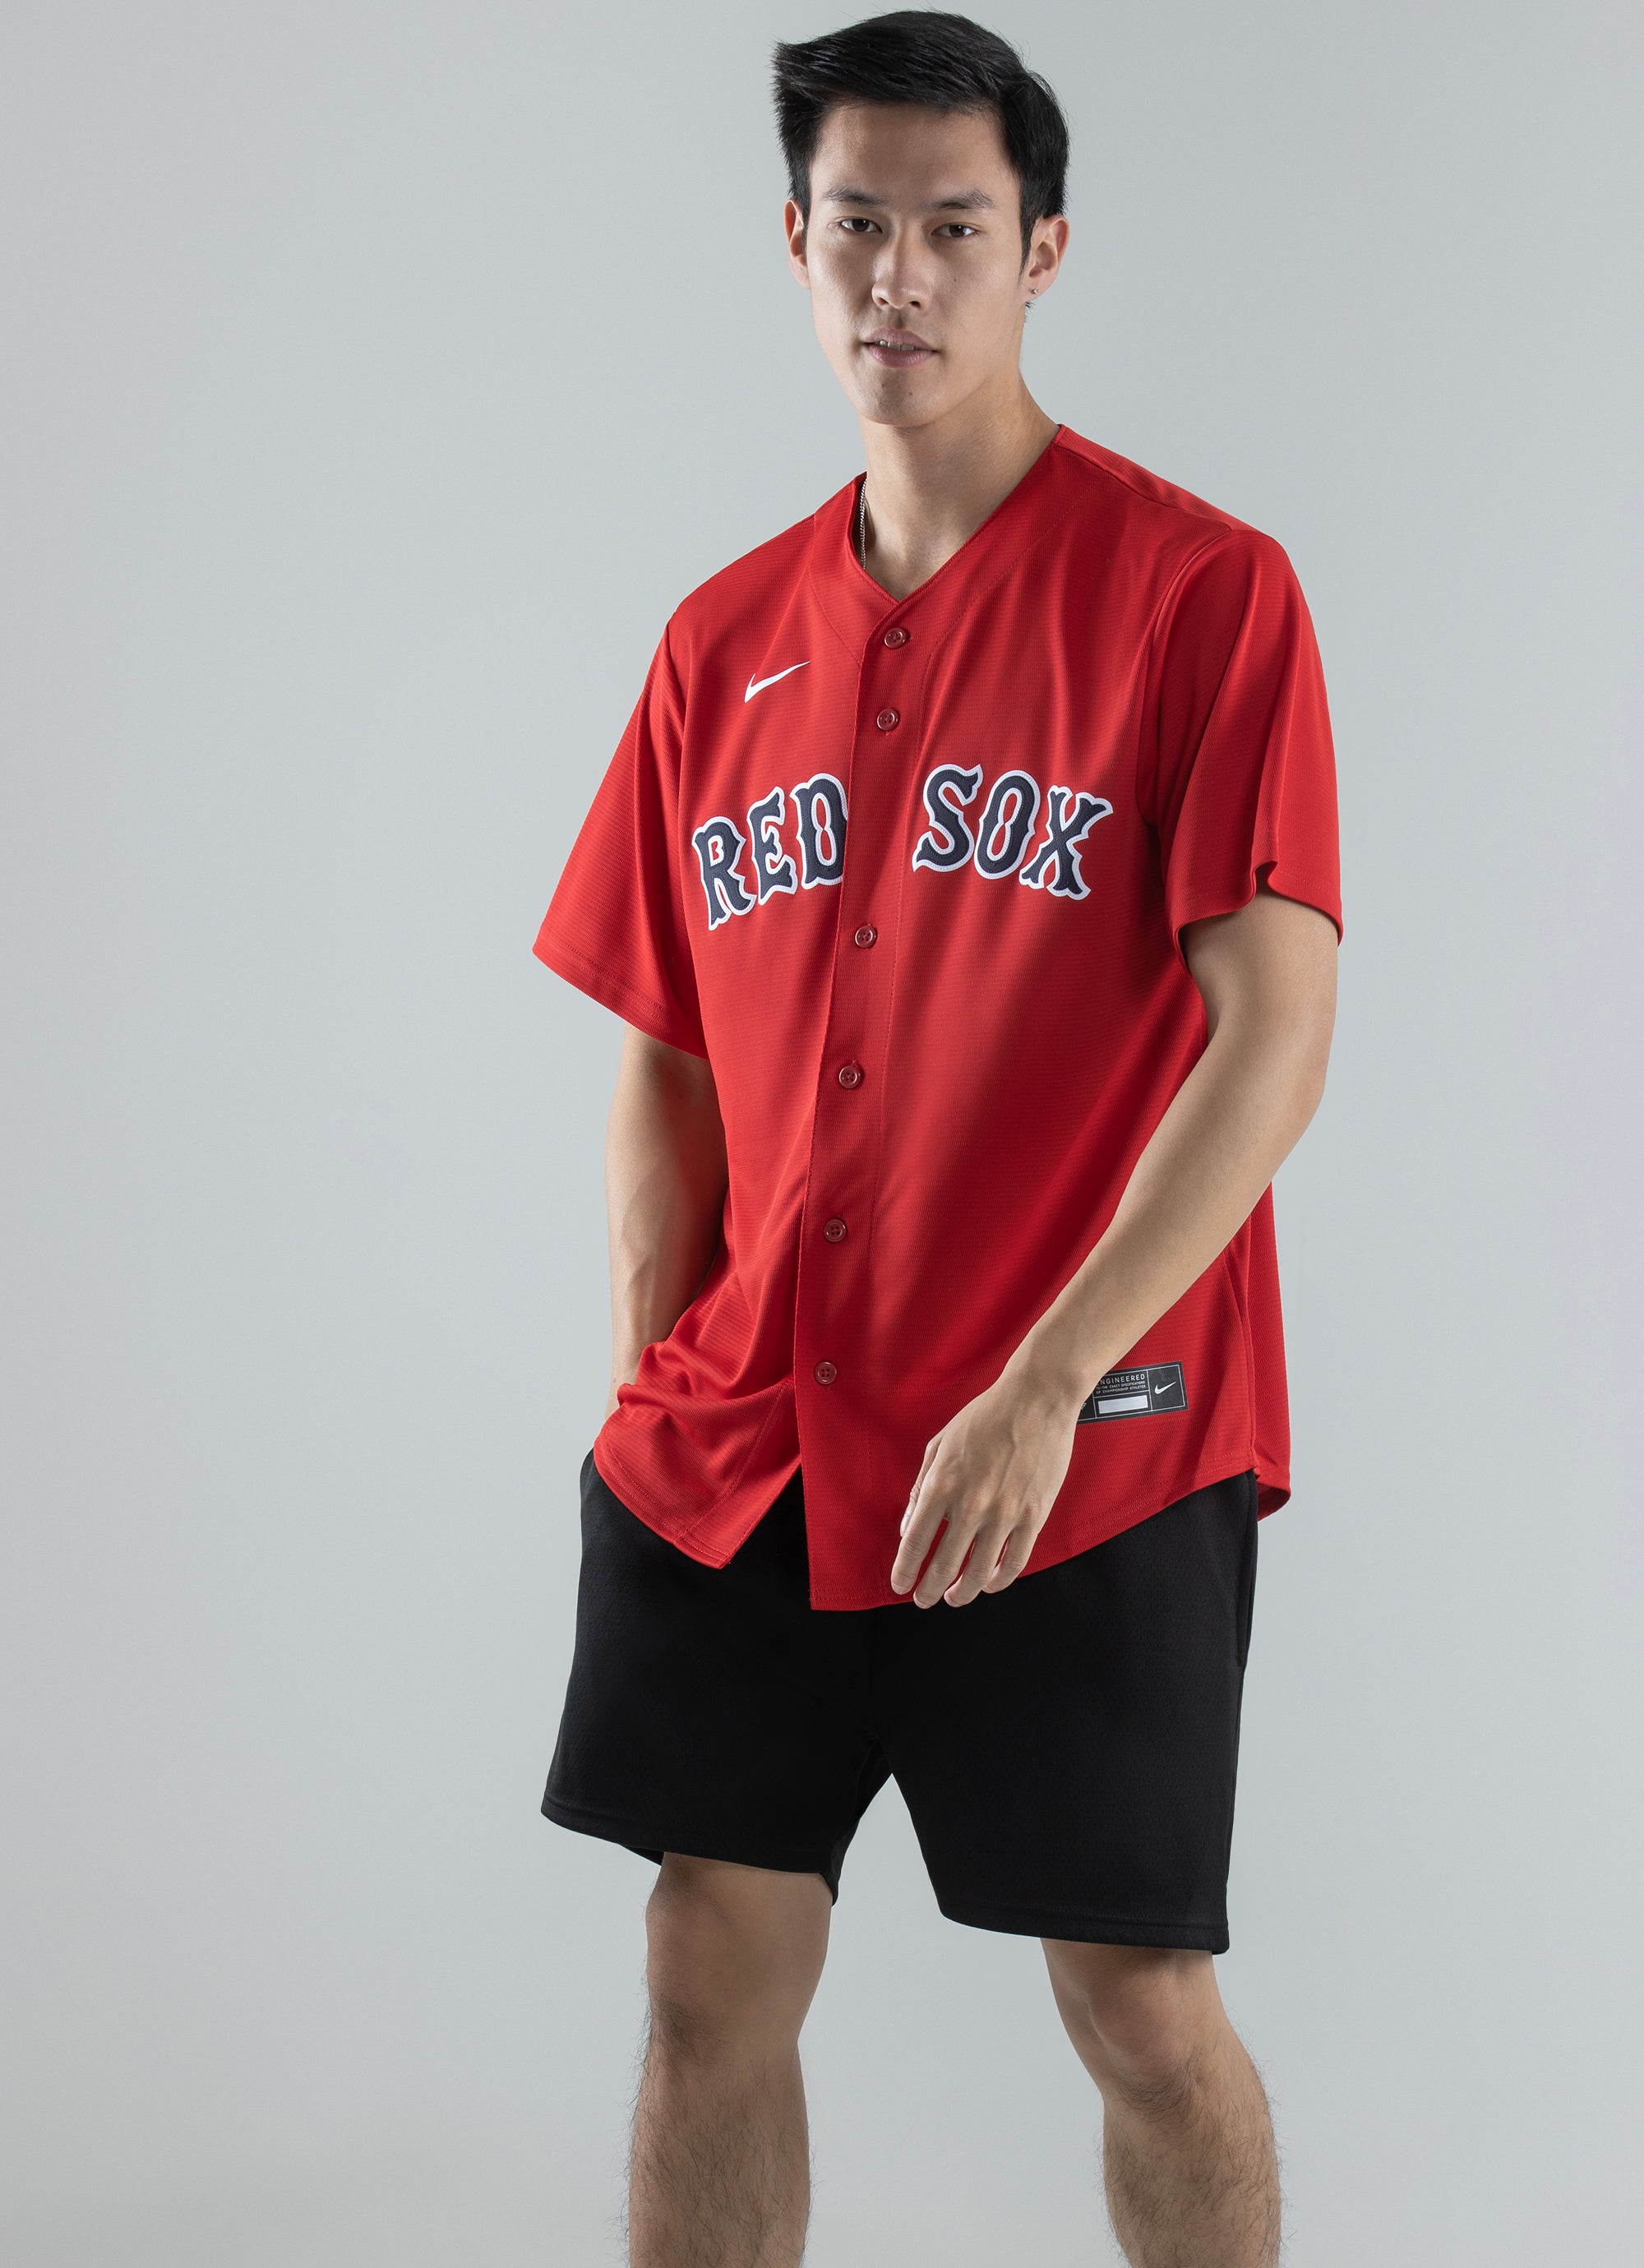 mlb jersey outfit men